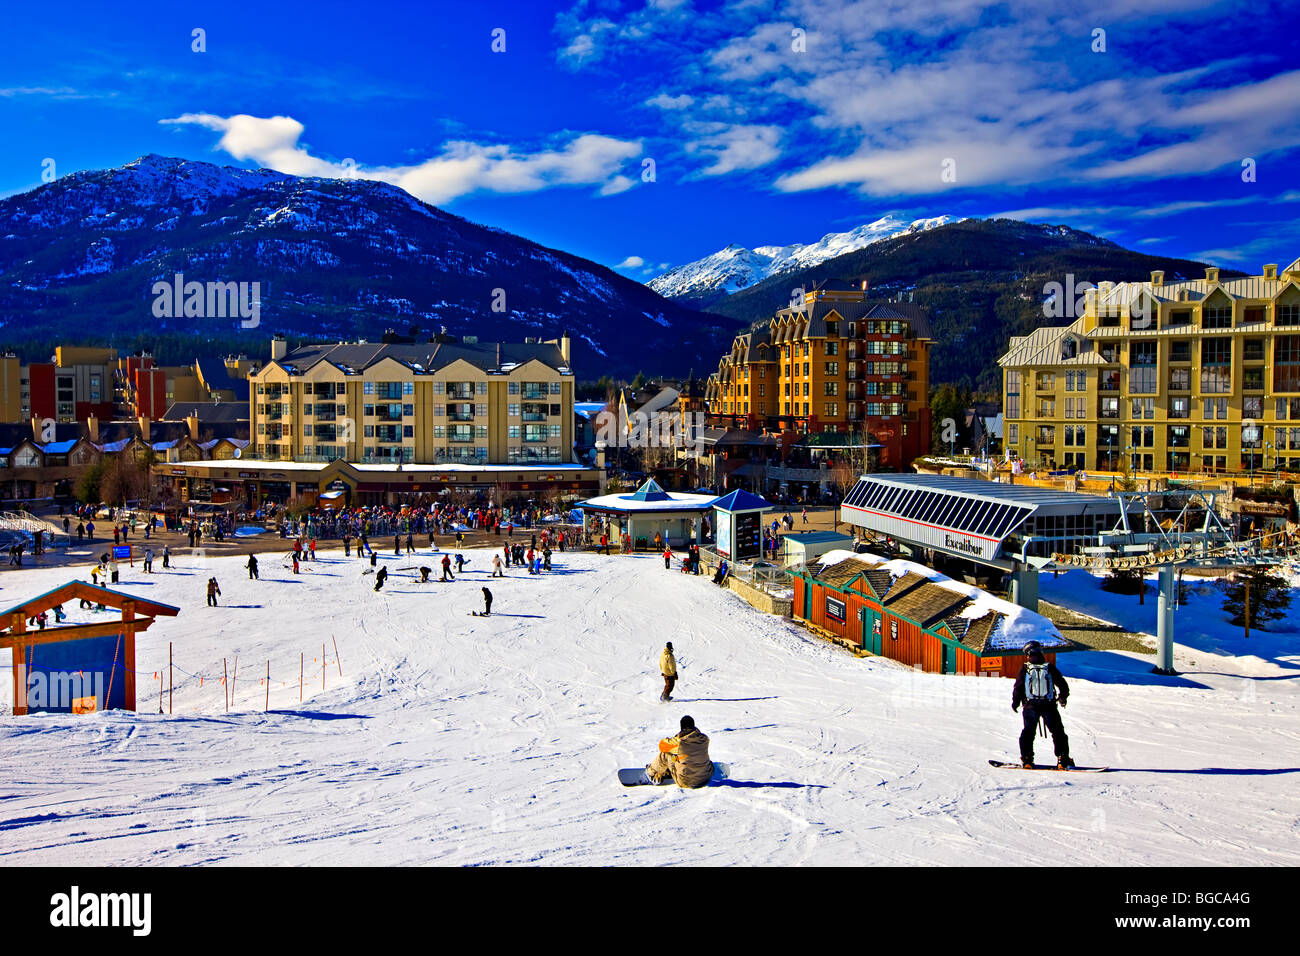 Skiers and snowboarders at the base of Whistler Mountain and the Excalibur Gondola Lift, Whistler Village, British Columbia, Can Stock Photo